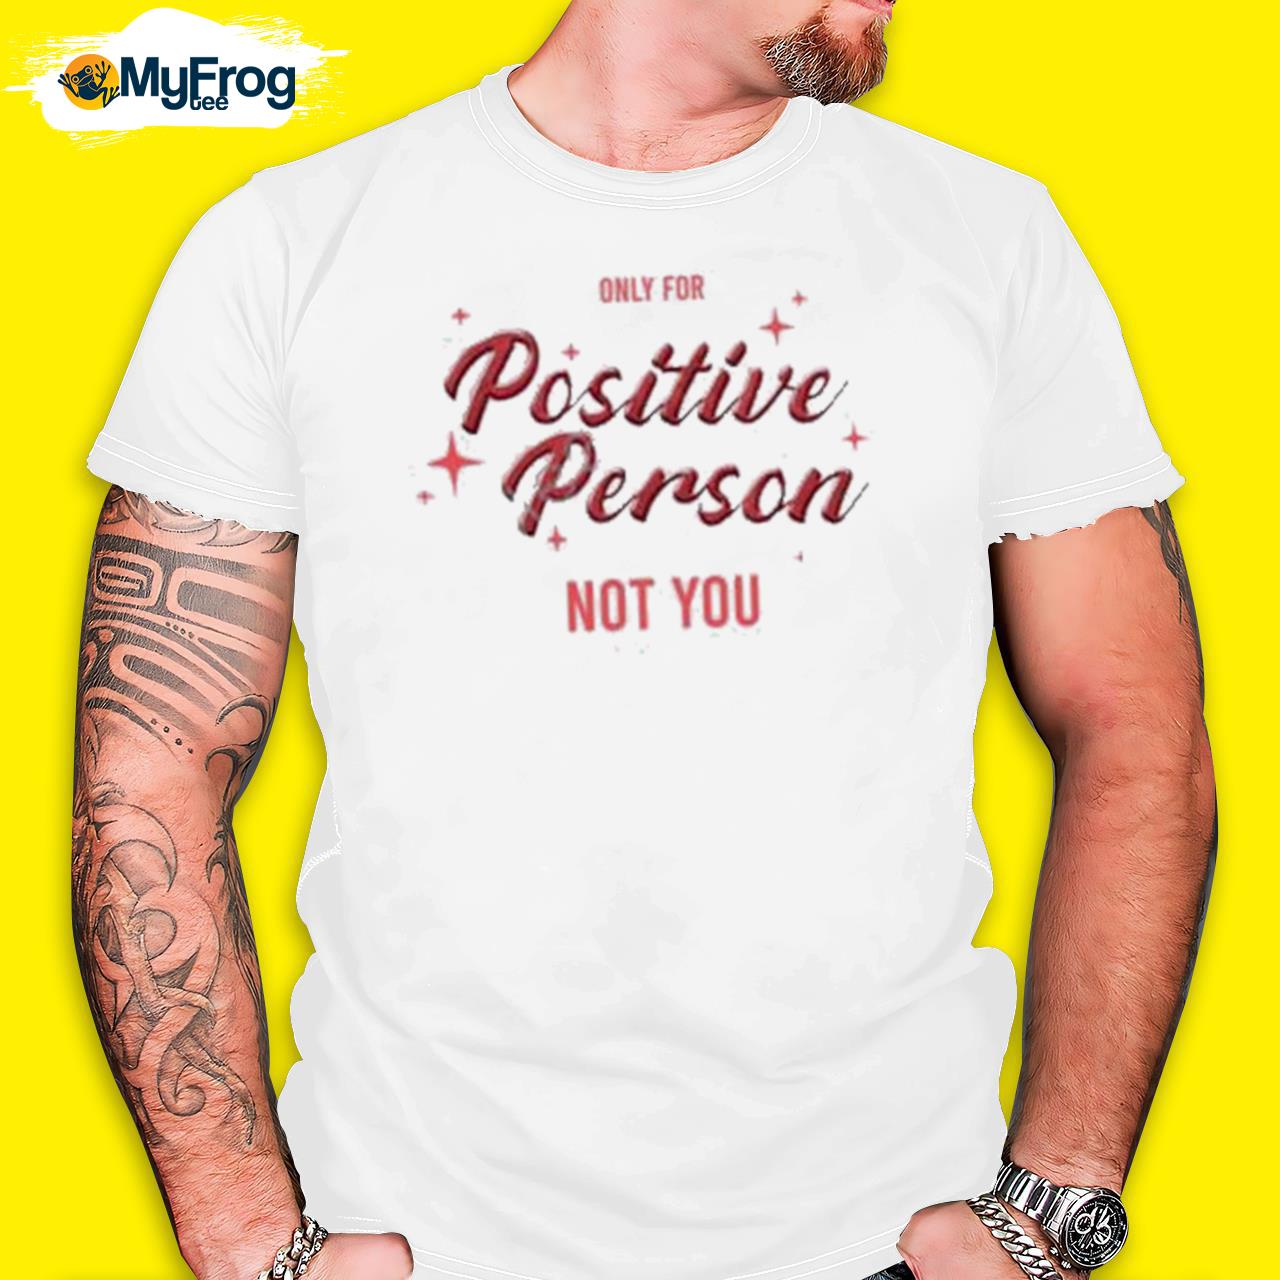 Only for positive person not you shirt